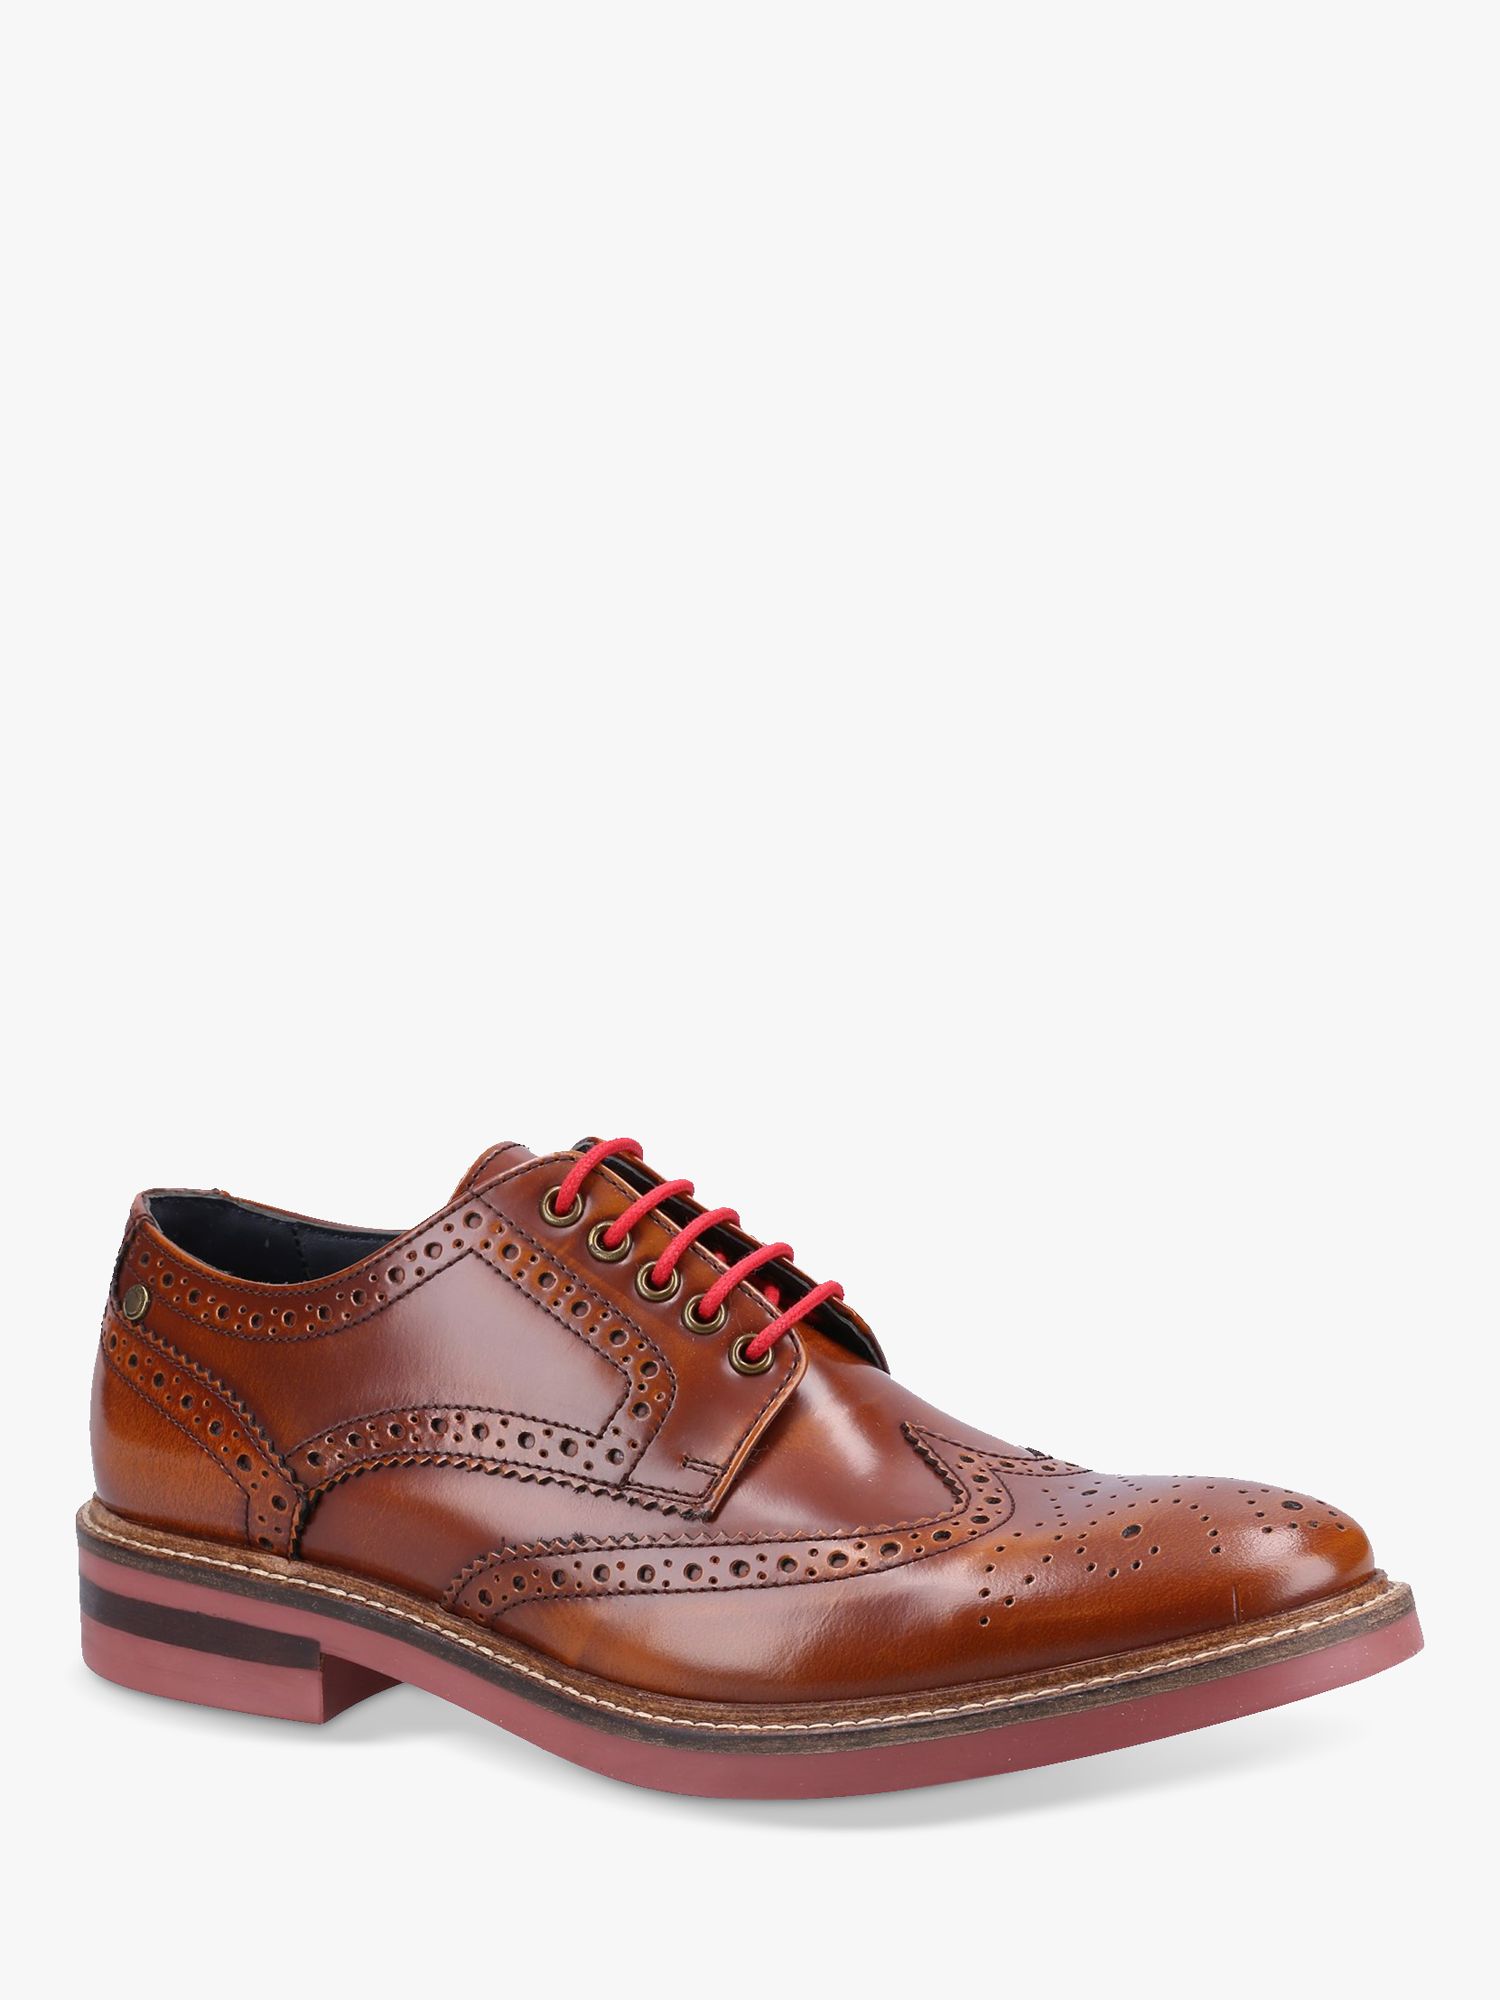 Base London Woburn Leather Derby Shoes, Tan, 6